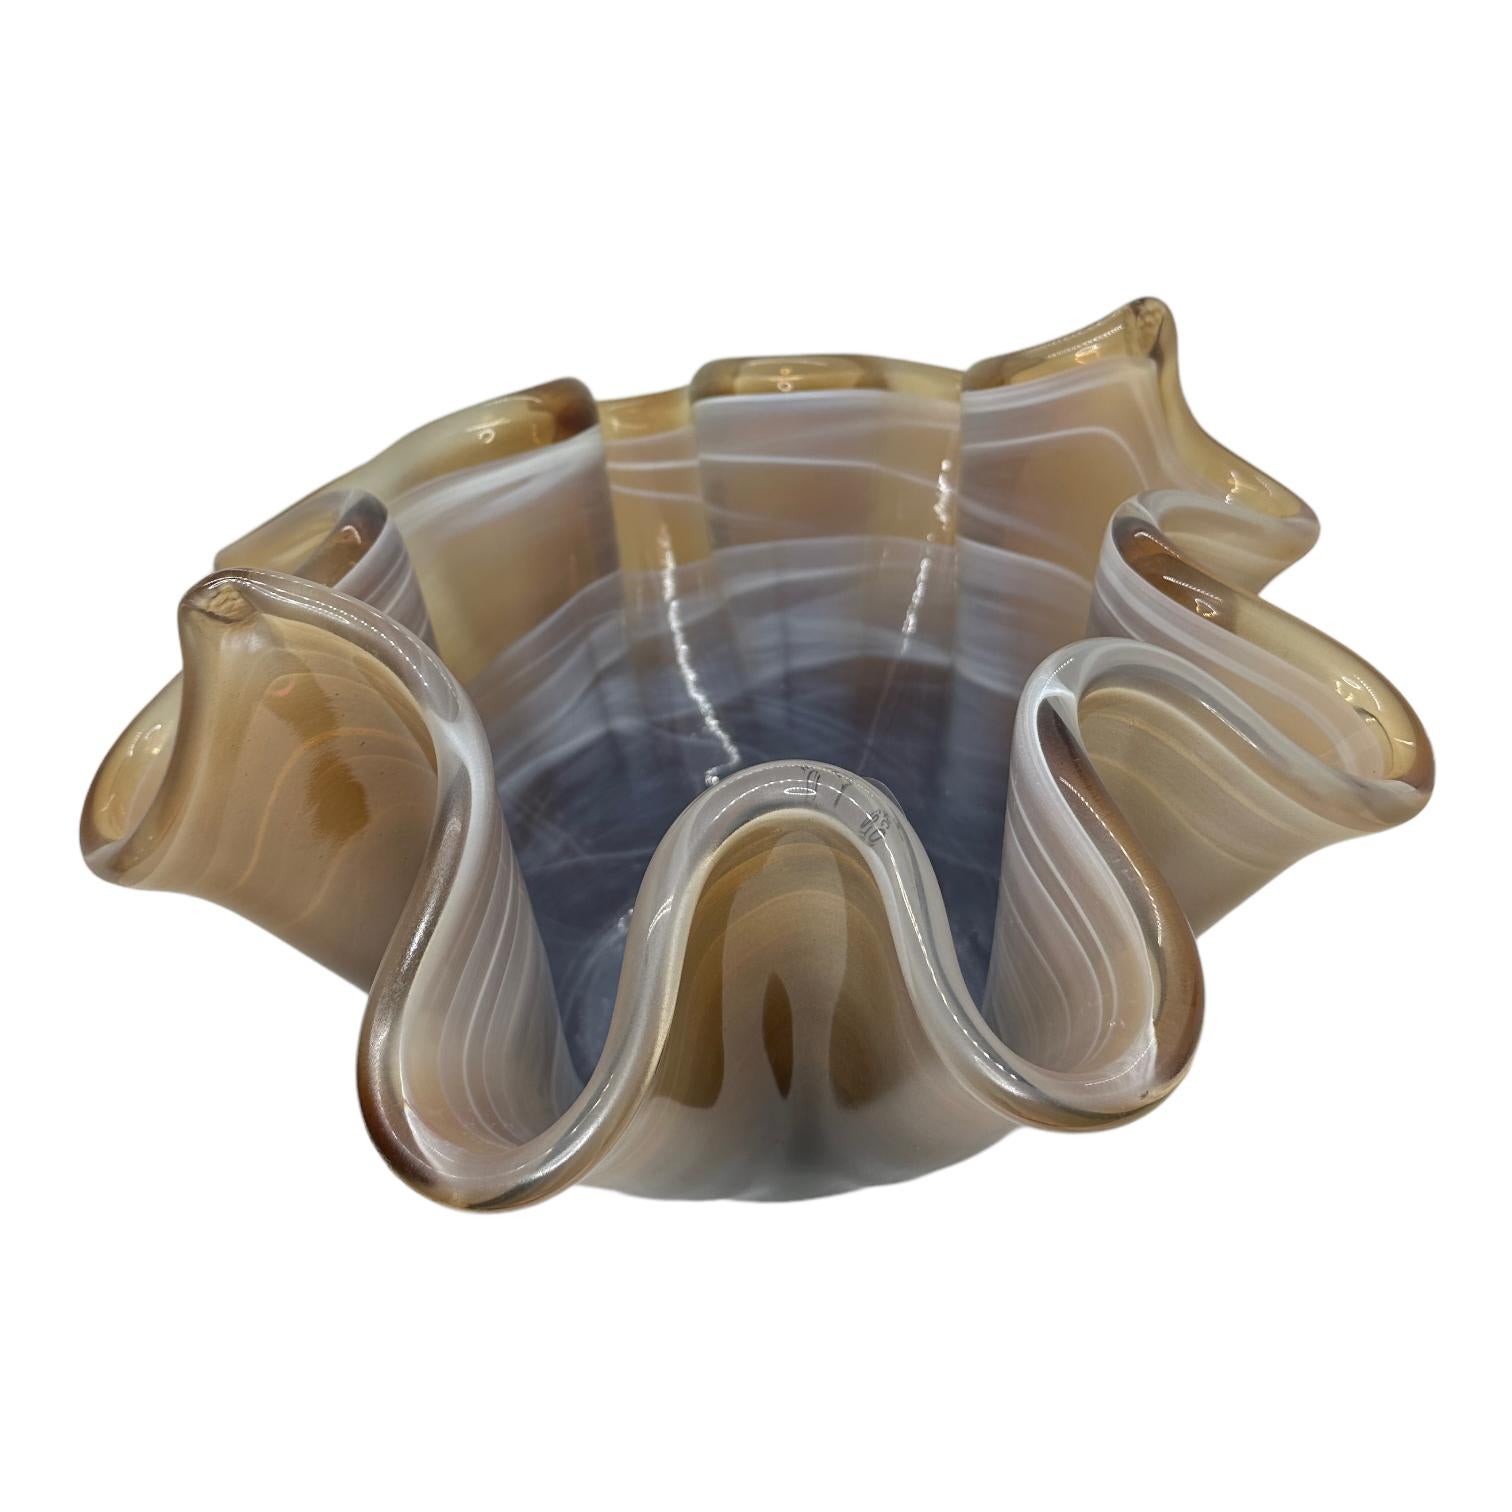 Beautiful Murano hand blown Italian art glass handkerchief bowl with some small air bubbles in the glass. Measures: 9 5/8